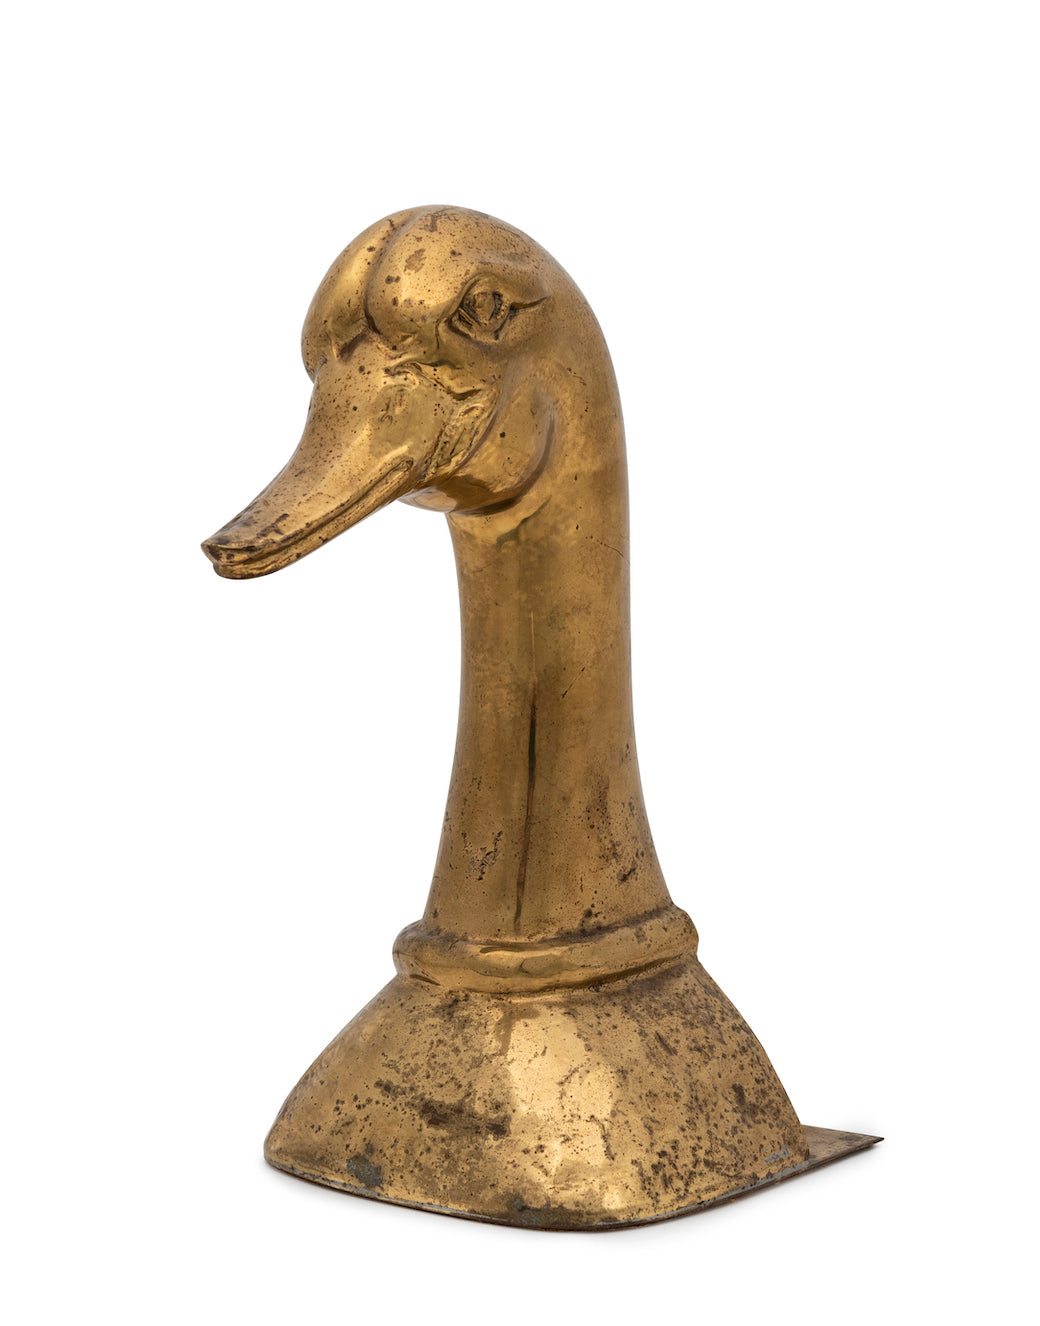 SOLD A vintage French solid brass doorstop in the form of a ducks head